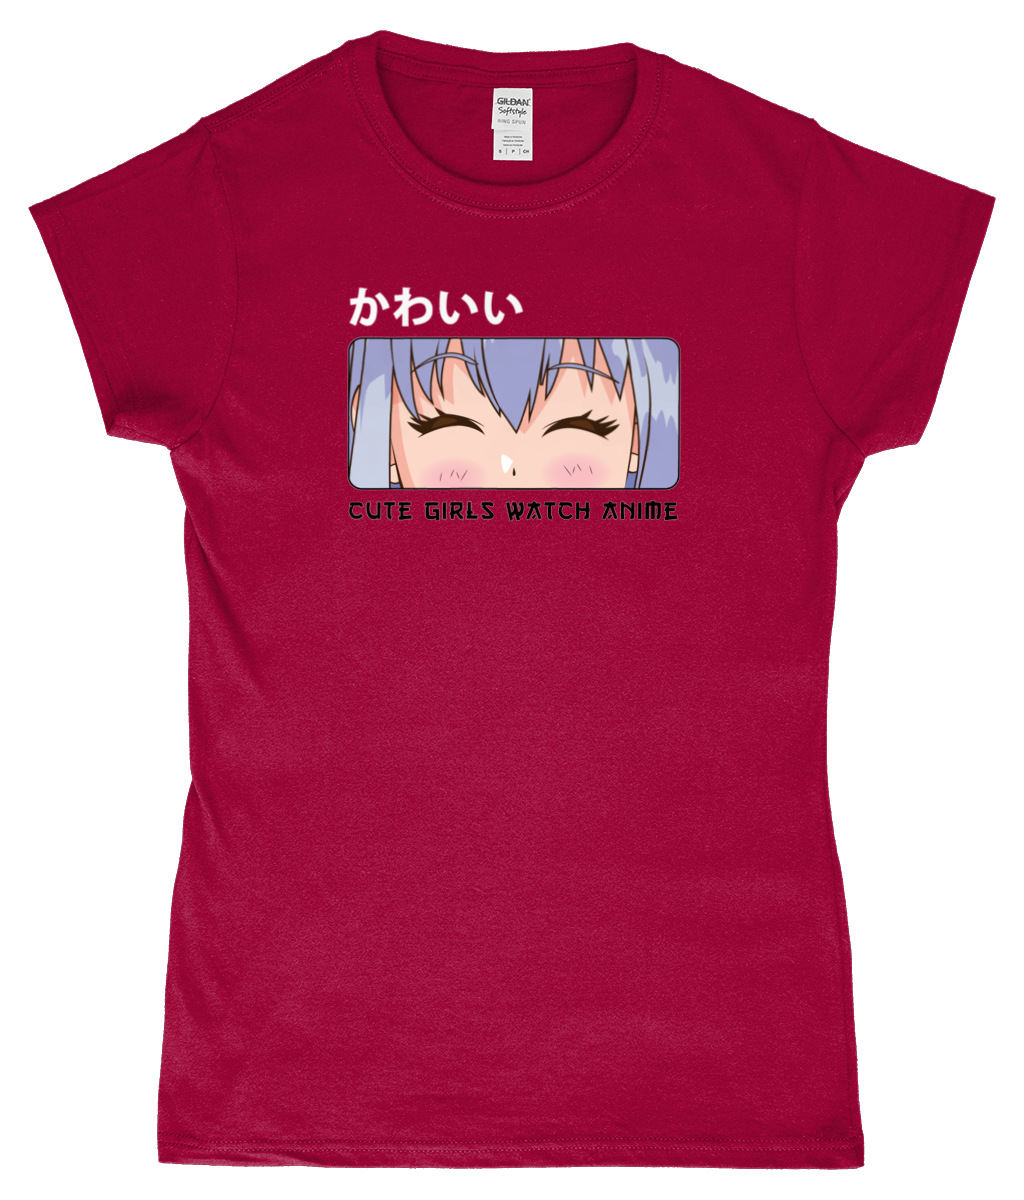 Cute Girls Watch Anime SoftStyle Ladies Fitted T-Shirt